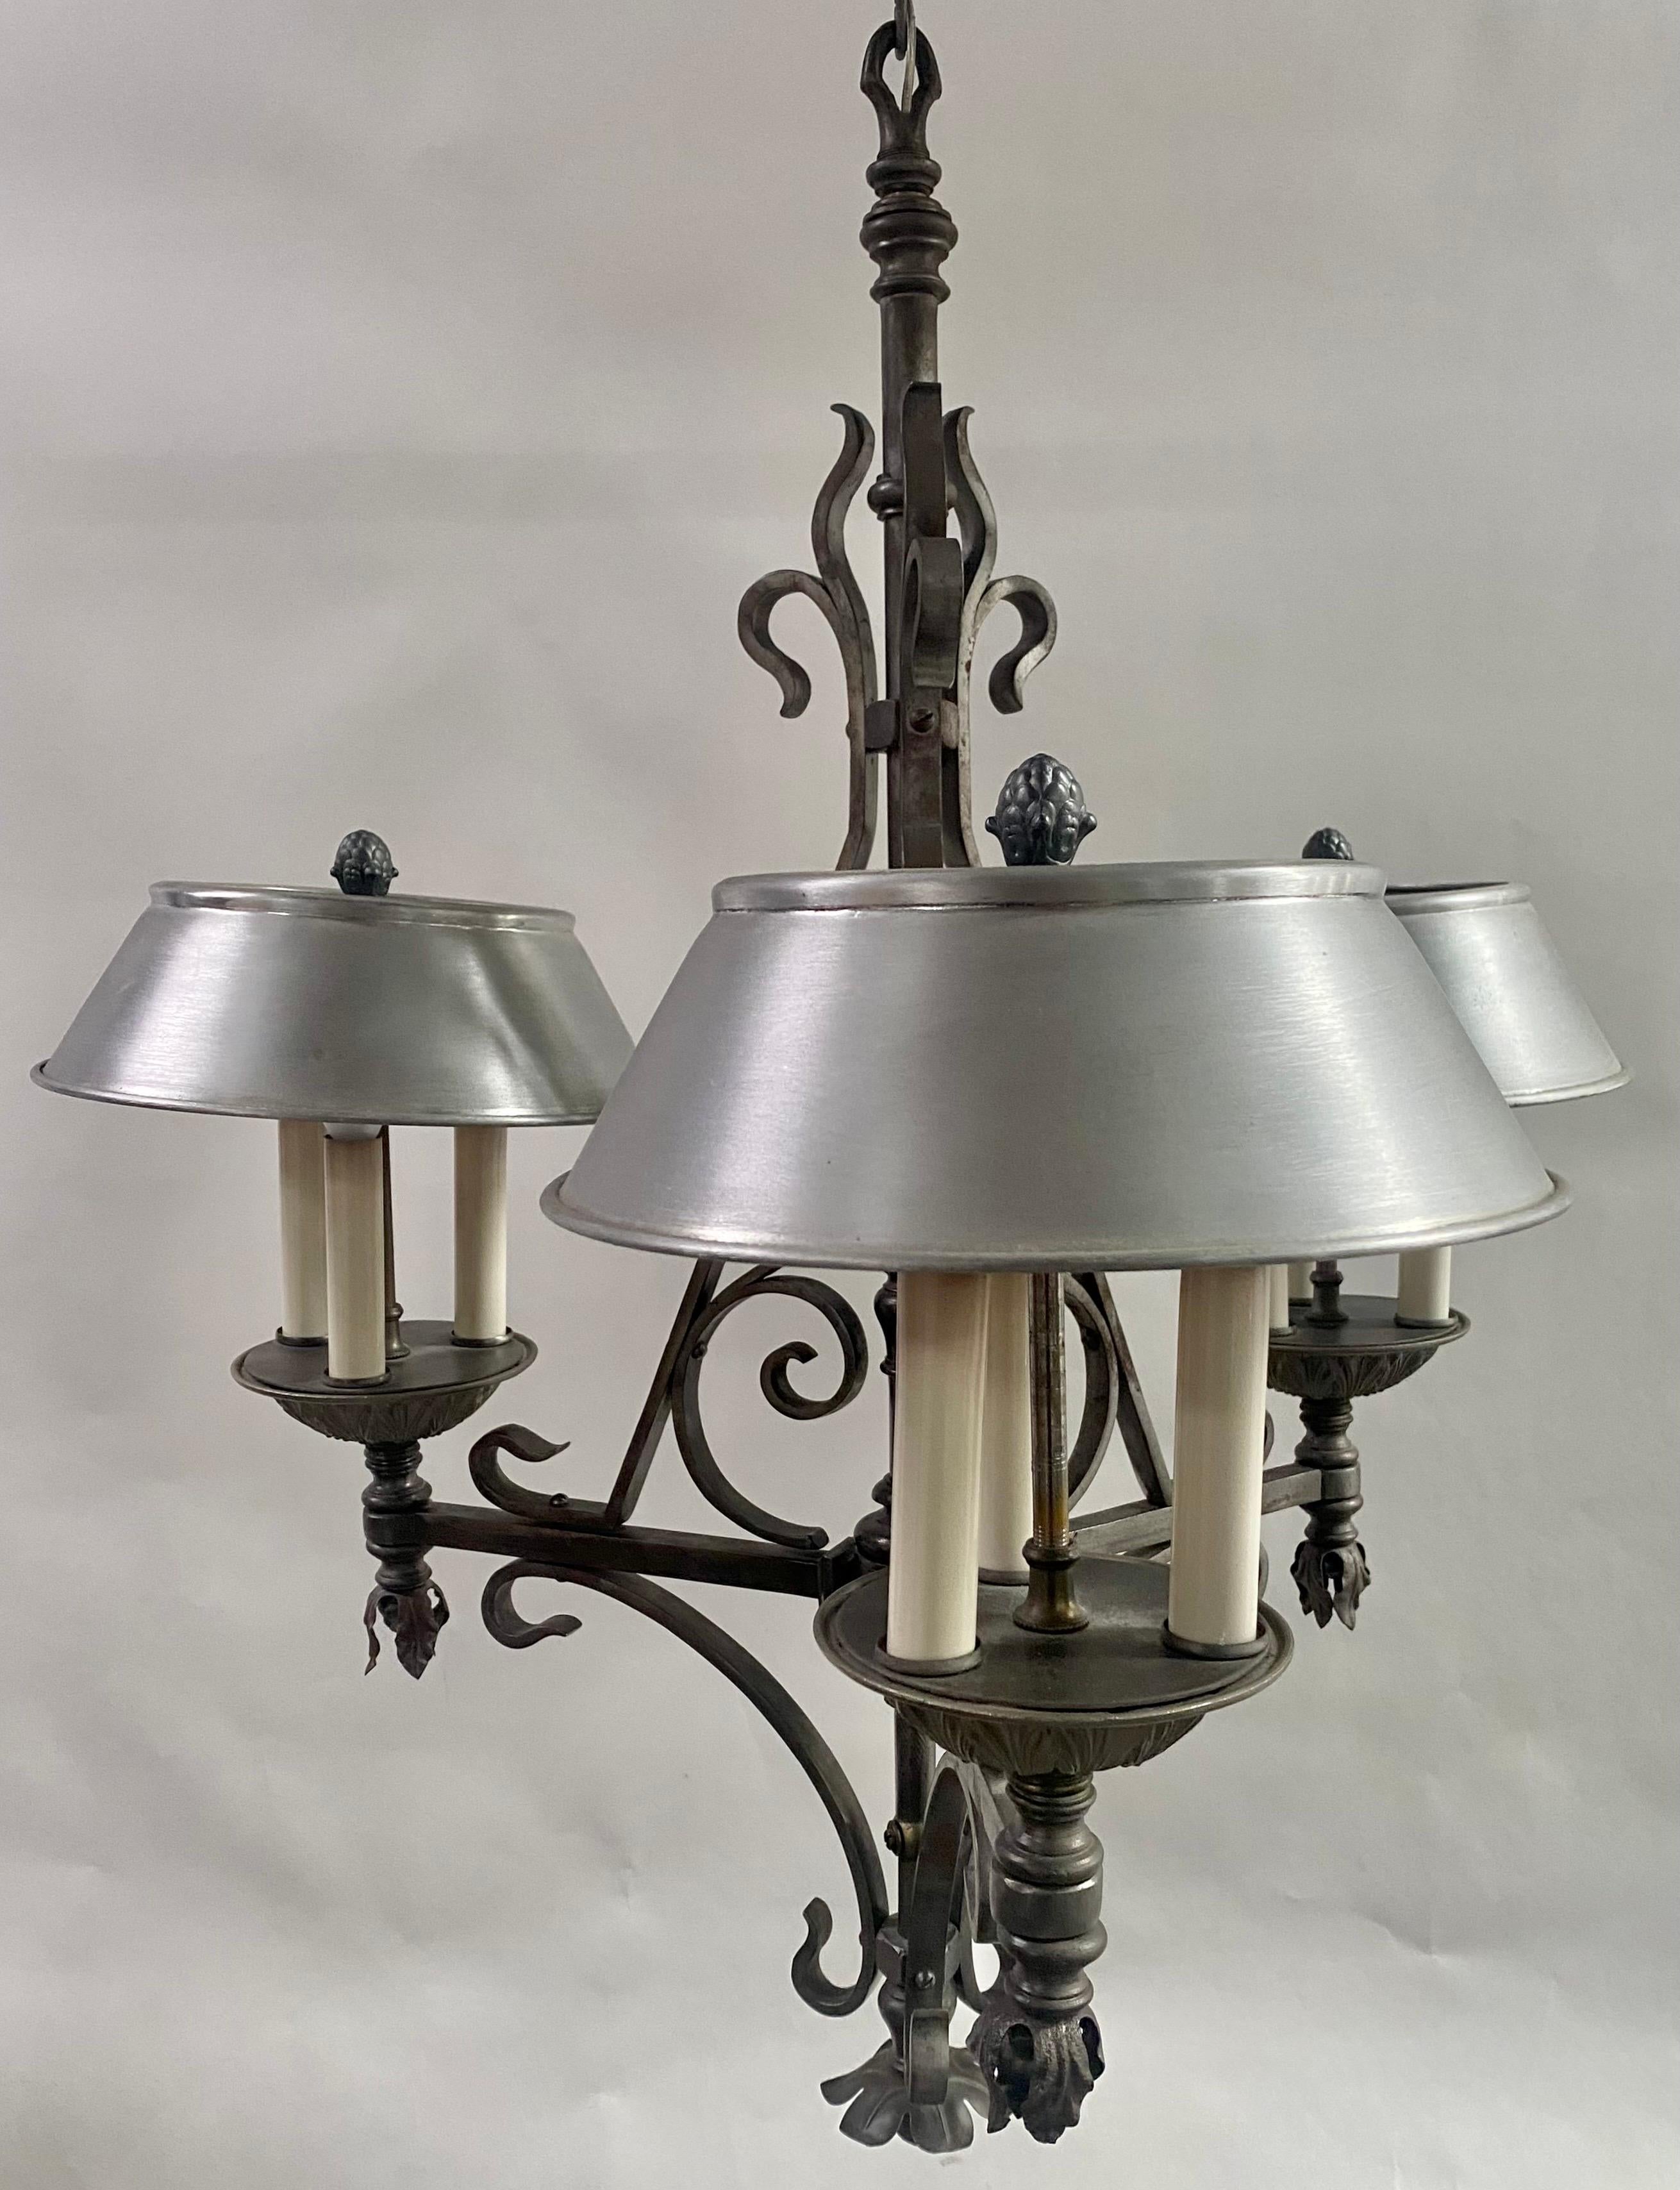 A 1930's French Victorian style wrought iron chandelier. This resplendent fixture boasts an intricate design characterized by three gracefully arched horizontal arms, each culminating in a round bobeche. Adorning these bobeche are three candelabra